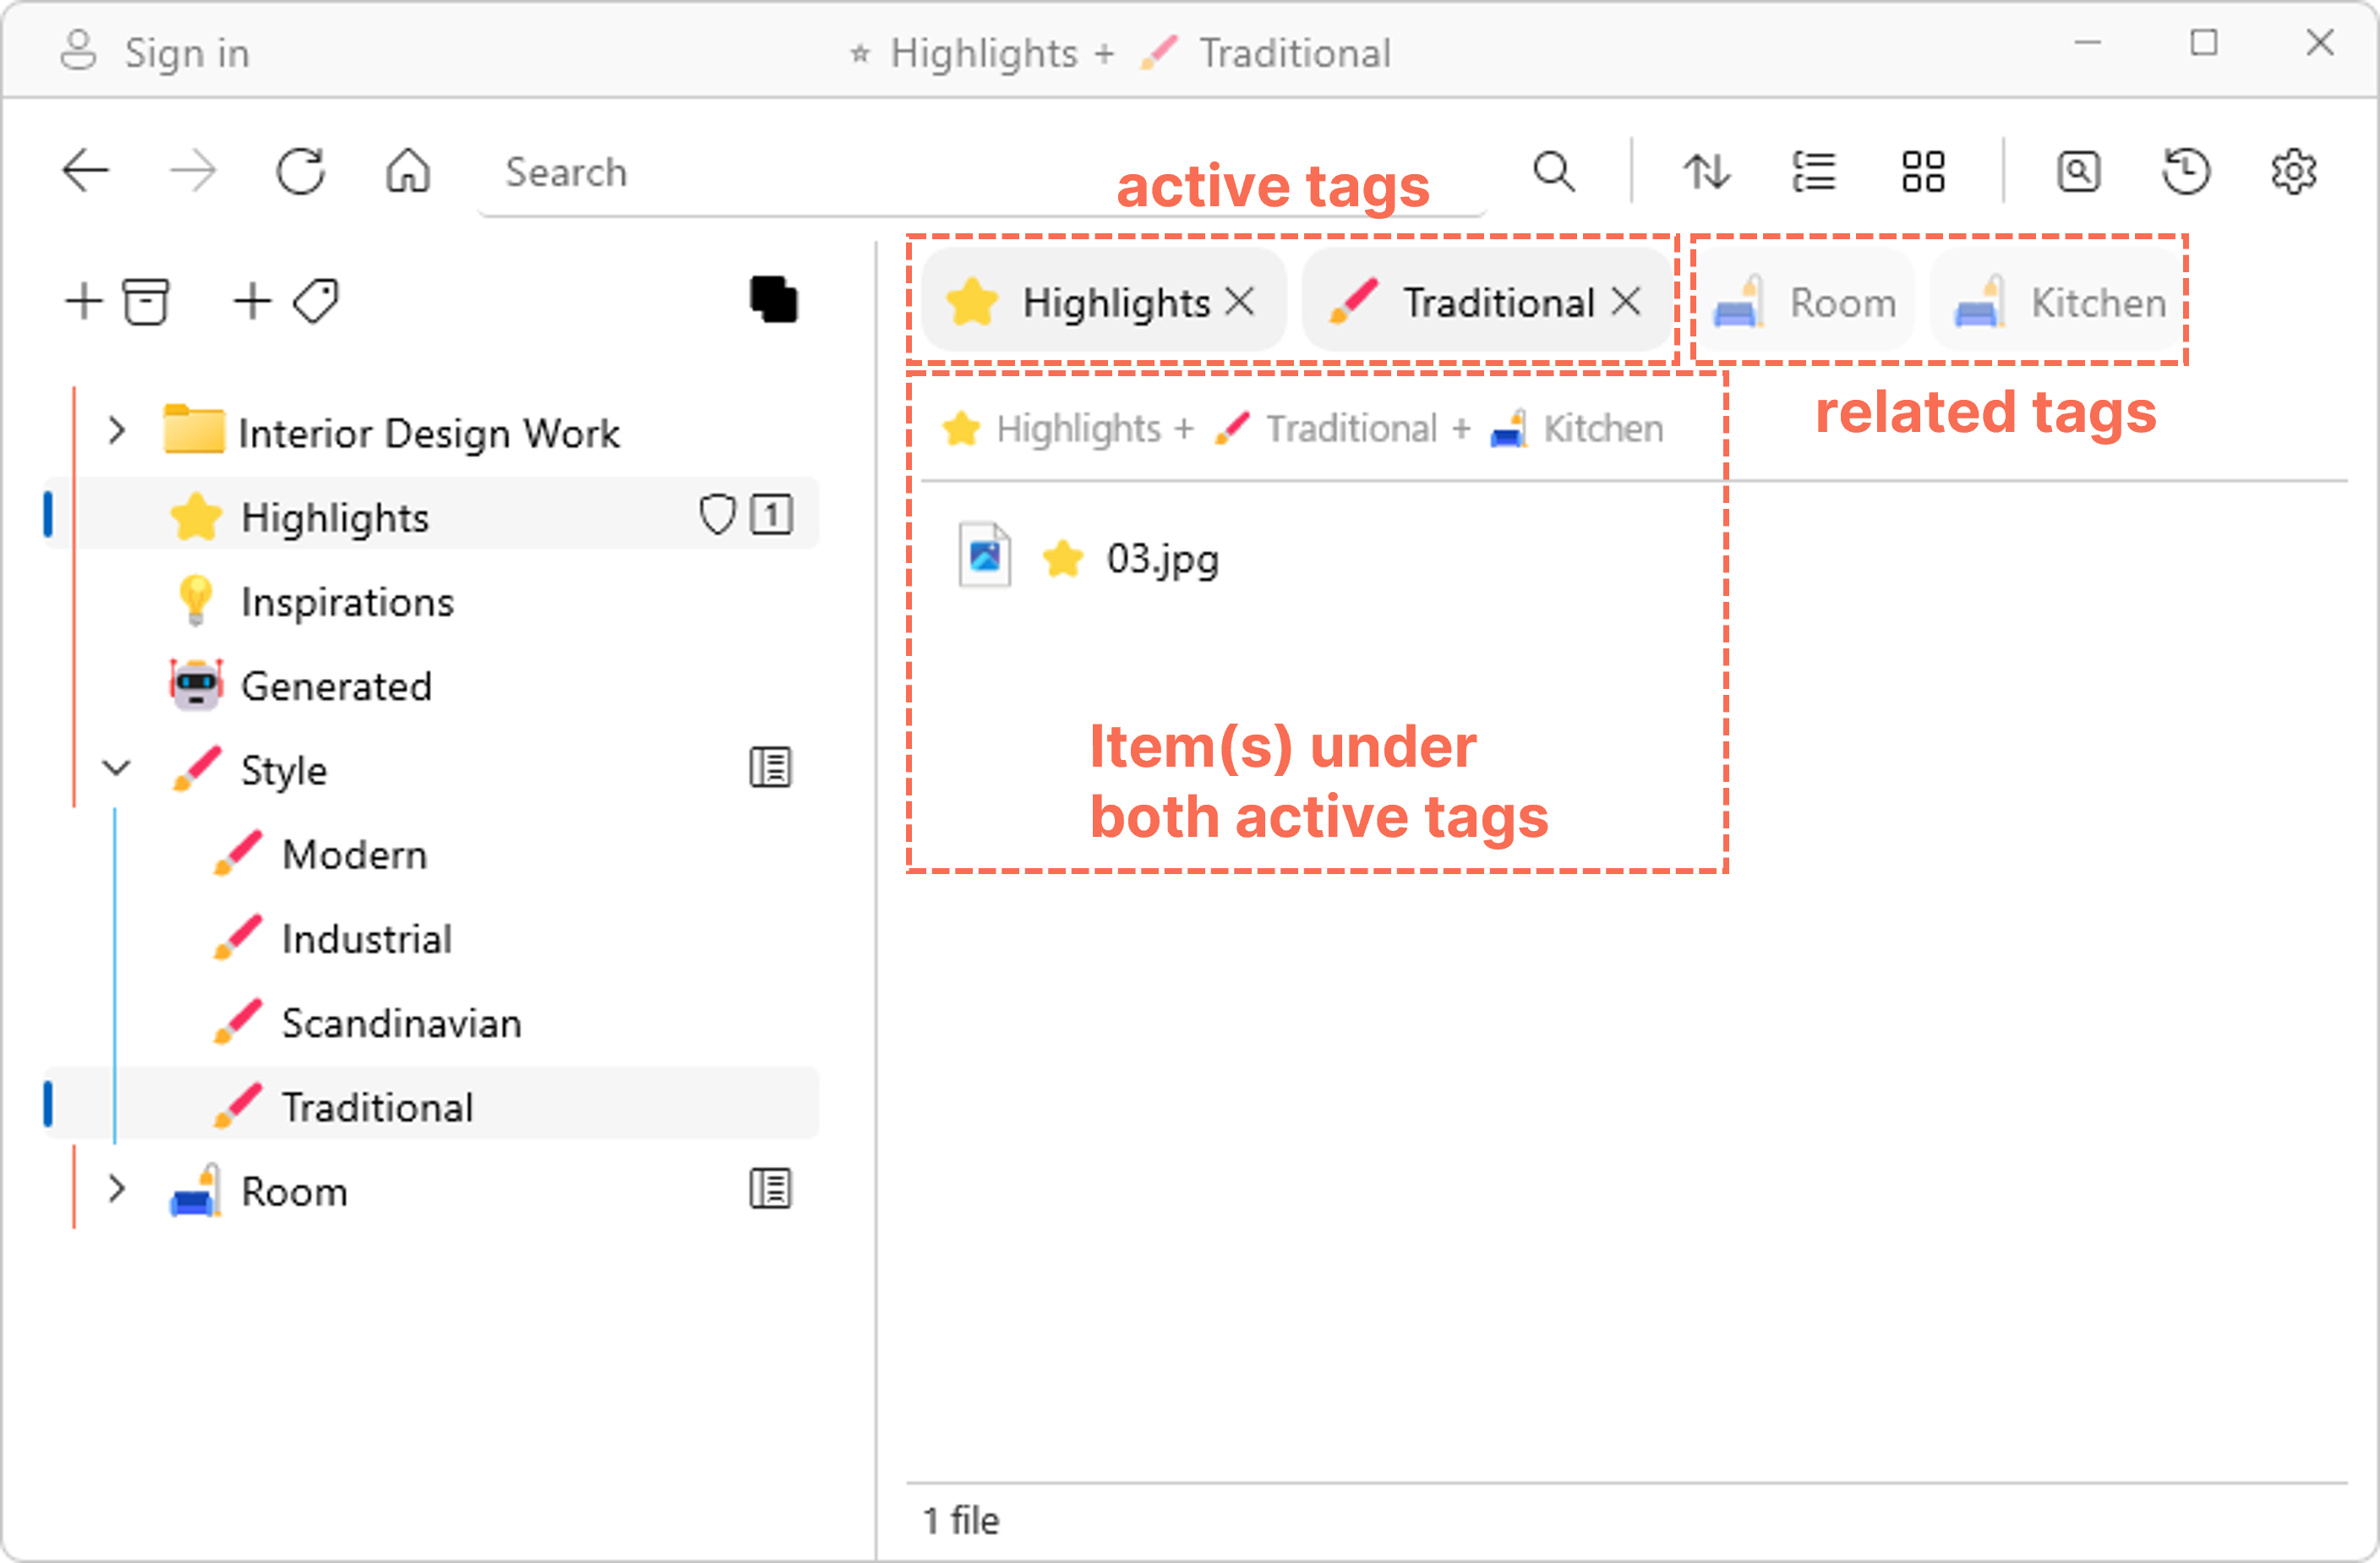 Activated multiple tags